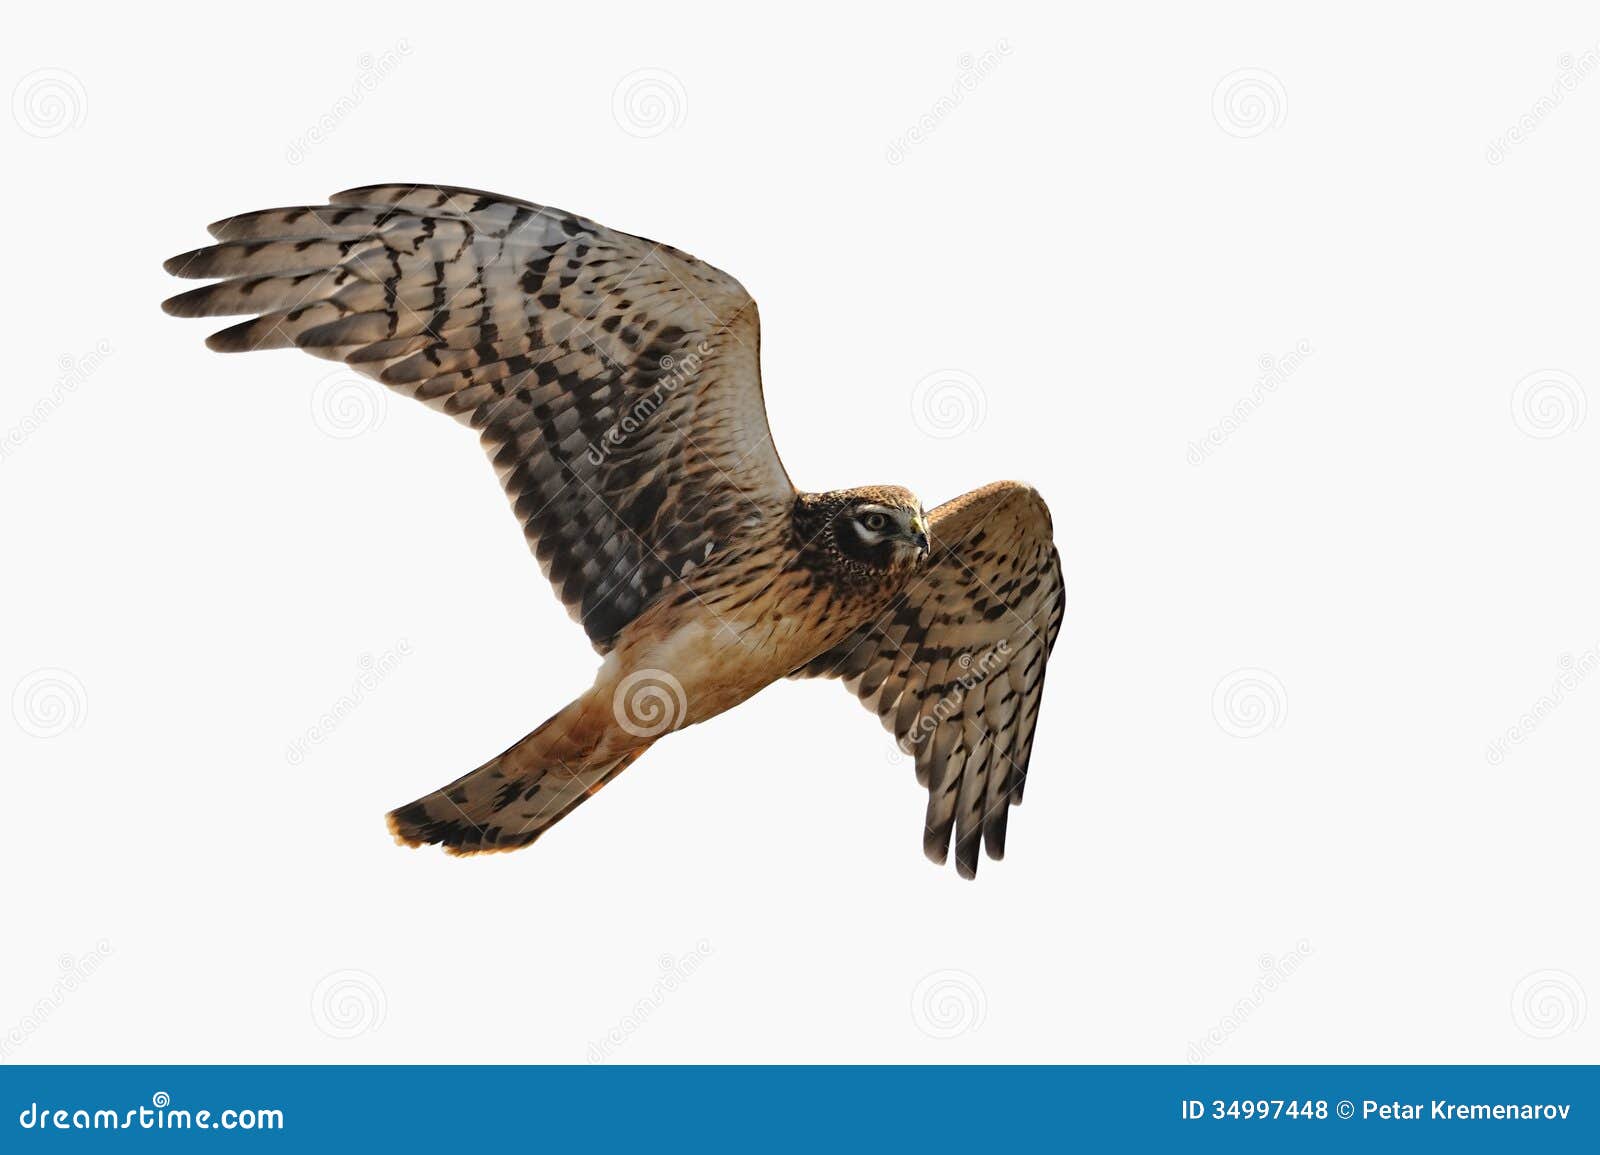 northern harrier is soaring into the air , 